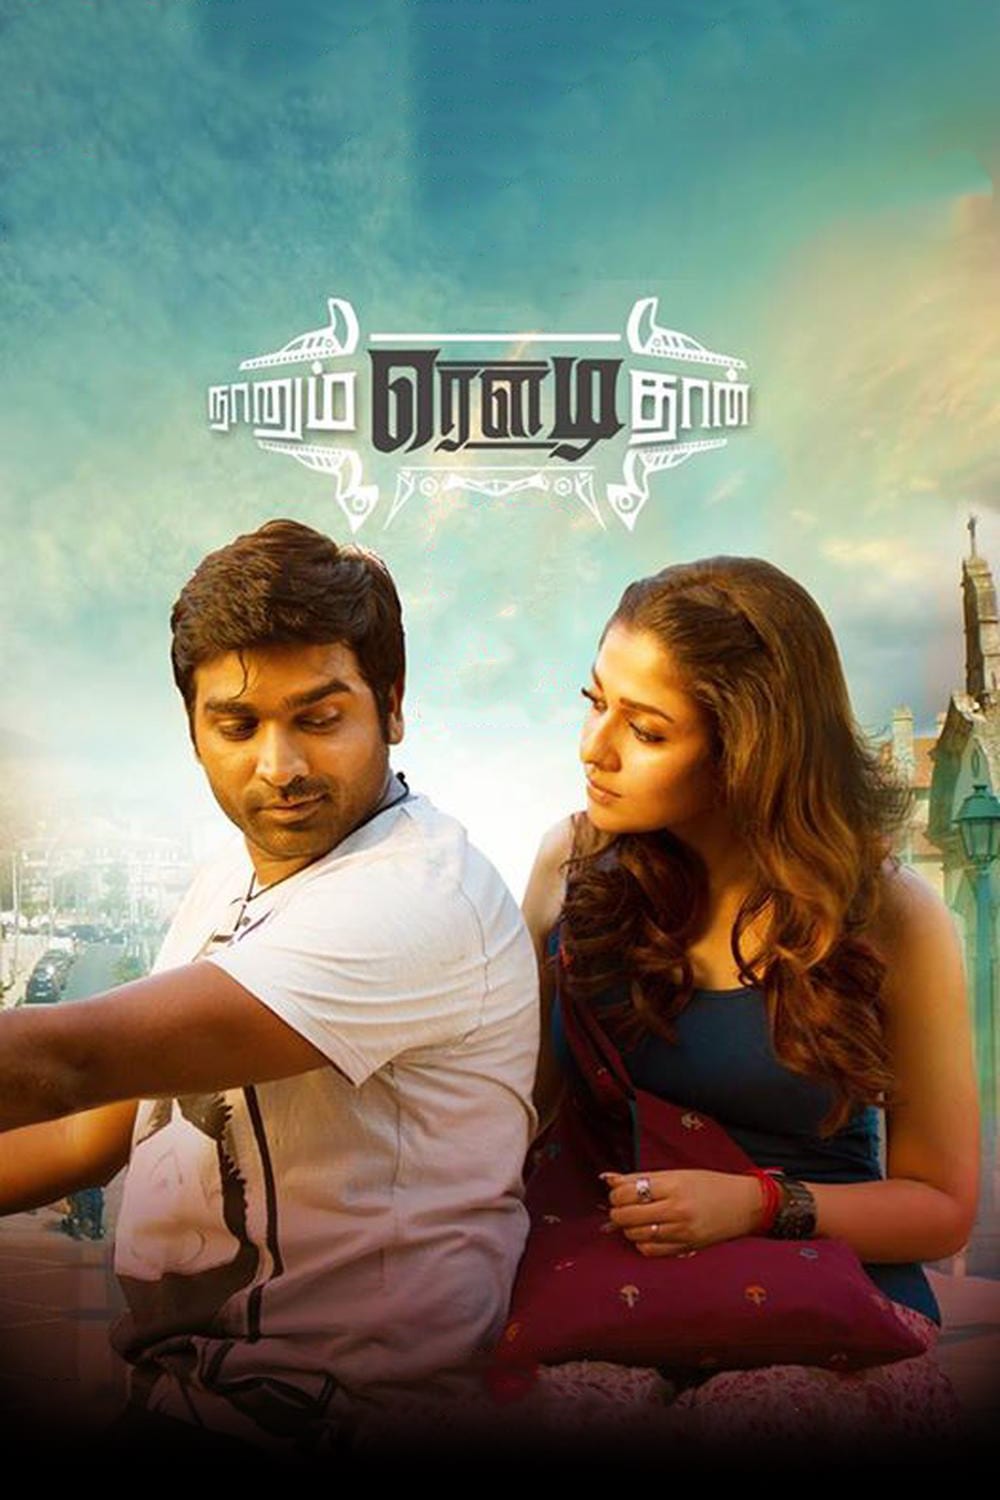 Poster for the movie "Naanum Rowdydhaan"